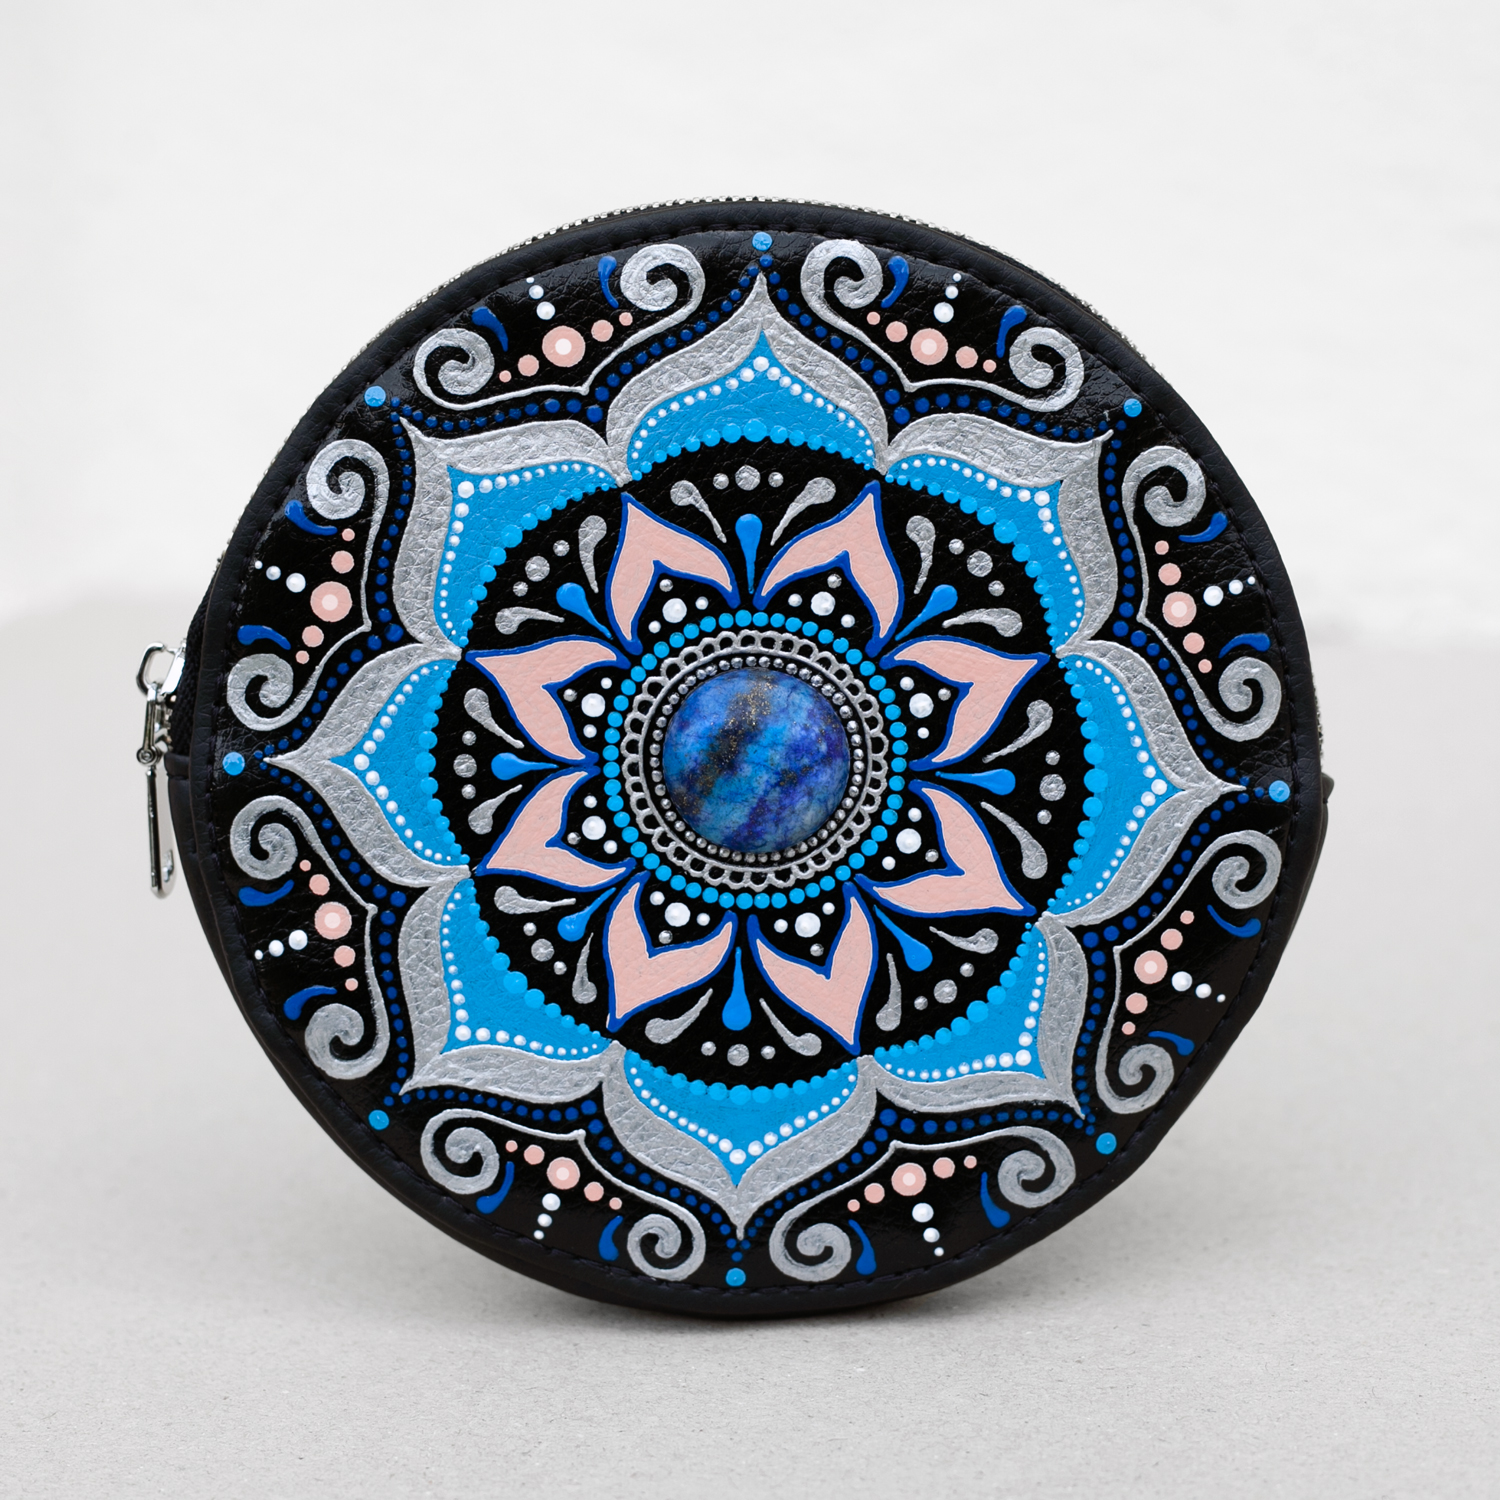 Round leather wallet with blue mandala painting and lapis lazuli stone in the center. Front view, light gray background.